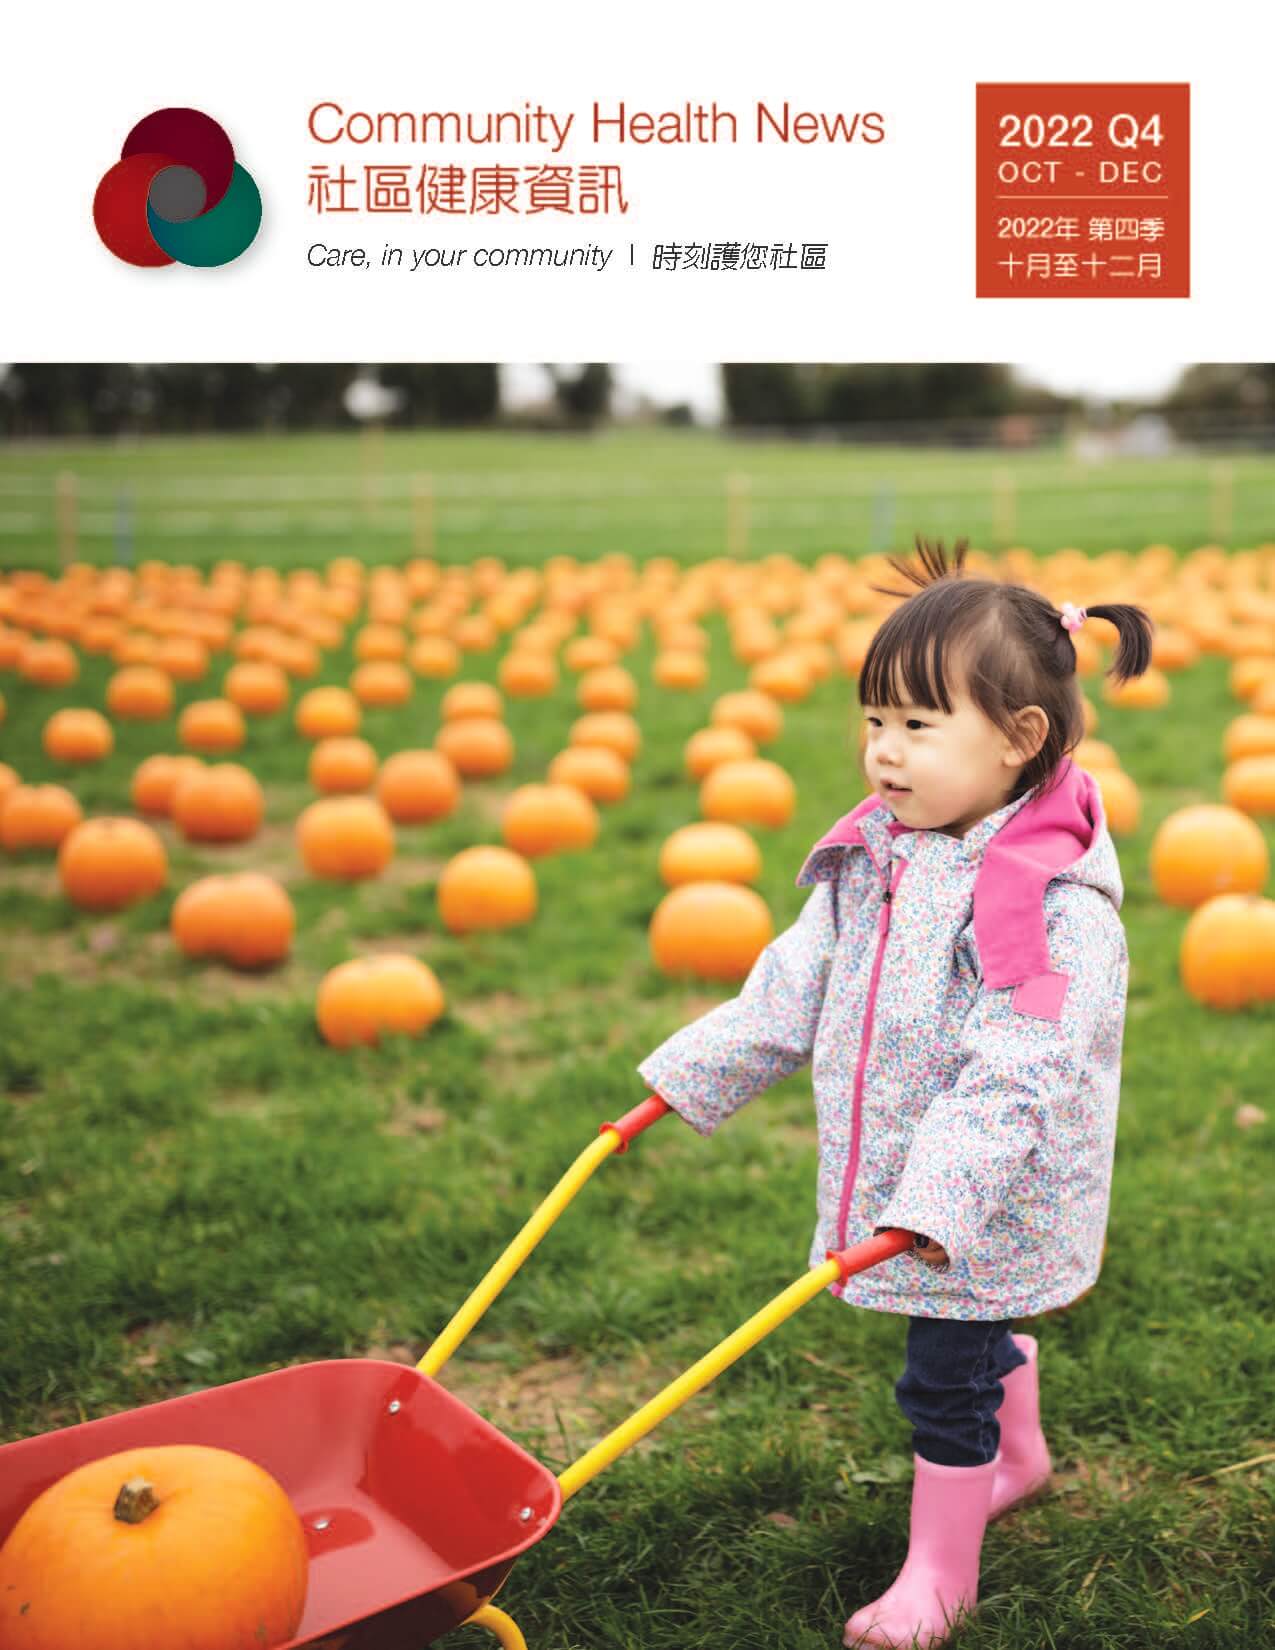 cchp 2022 q3 newsletter cover, a liitle girl with pumkin